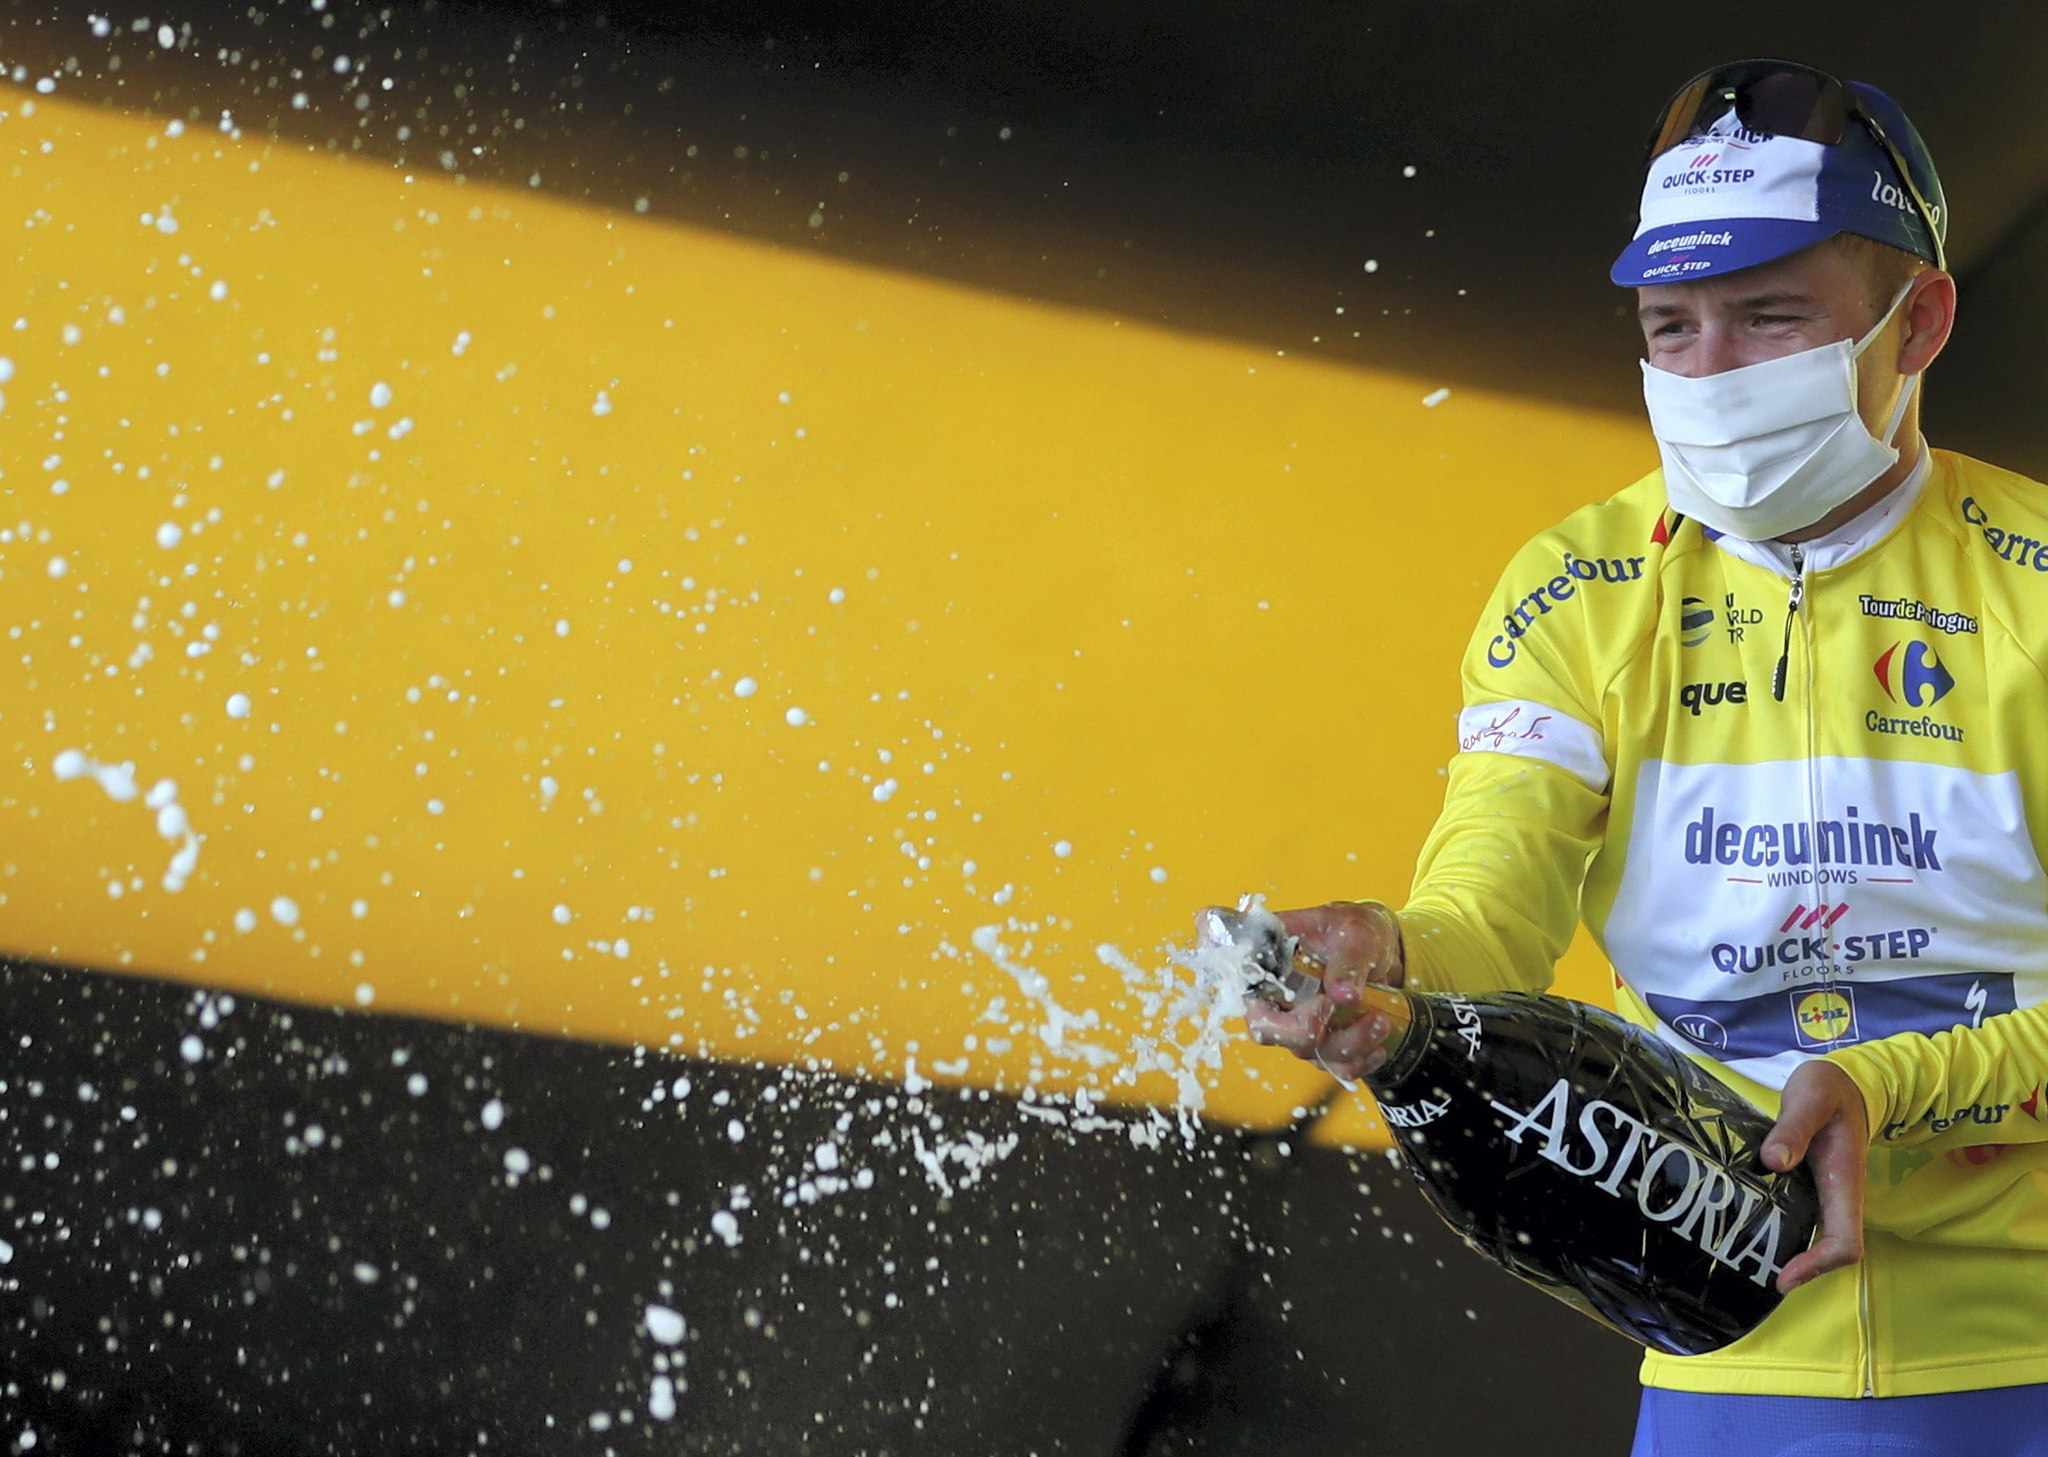 Bukowina Tatrzanska (Poland), 08/08/2020.- Belgian cyclist Remco lt;HIT gt;Evenepoel lt;/HIT gt; of Deceuninck-Quick Step wearing a protective face mask celebrates on the podium after winning the 4th stage of Tour de Pologne cycling race, over 152,9 km between Bukovina Resort and Bukowina Tatrzanska, in Bukowina Tatrzanska, southern Poland, 08 August 2020. (Ciclismo, Polonia) EFE/EPA/Grzegorz Momot POLAND OUT